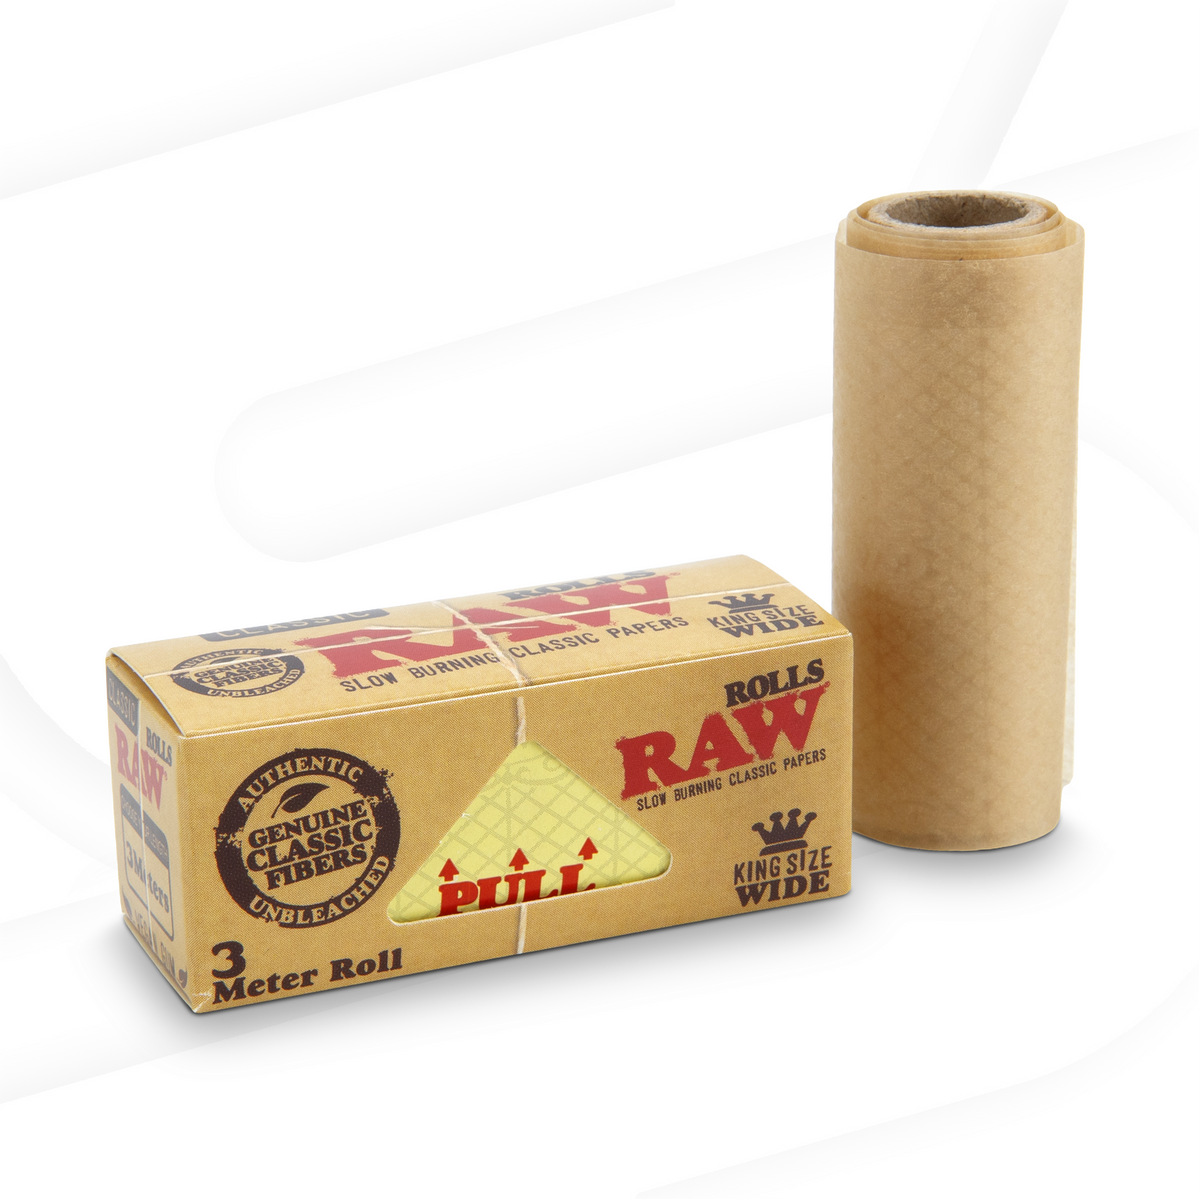 RAW Classic Paper Rolls King Size - 3 Meters Rolling Papers esd-official